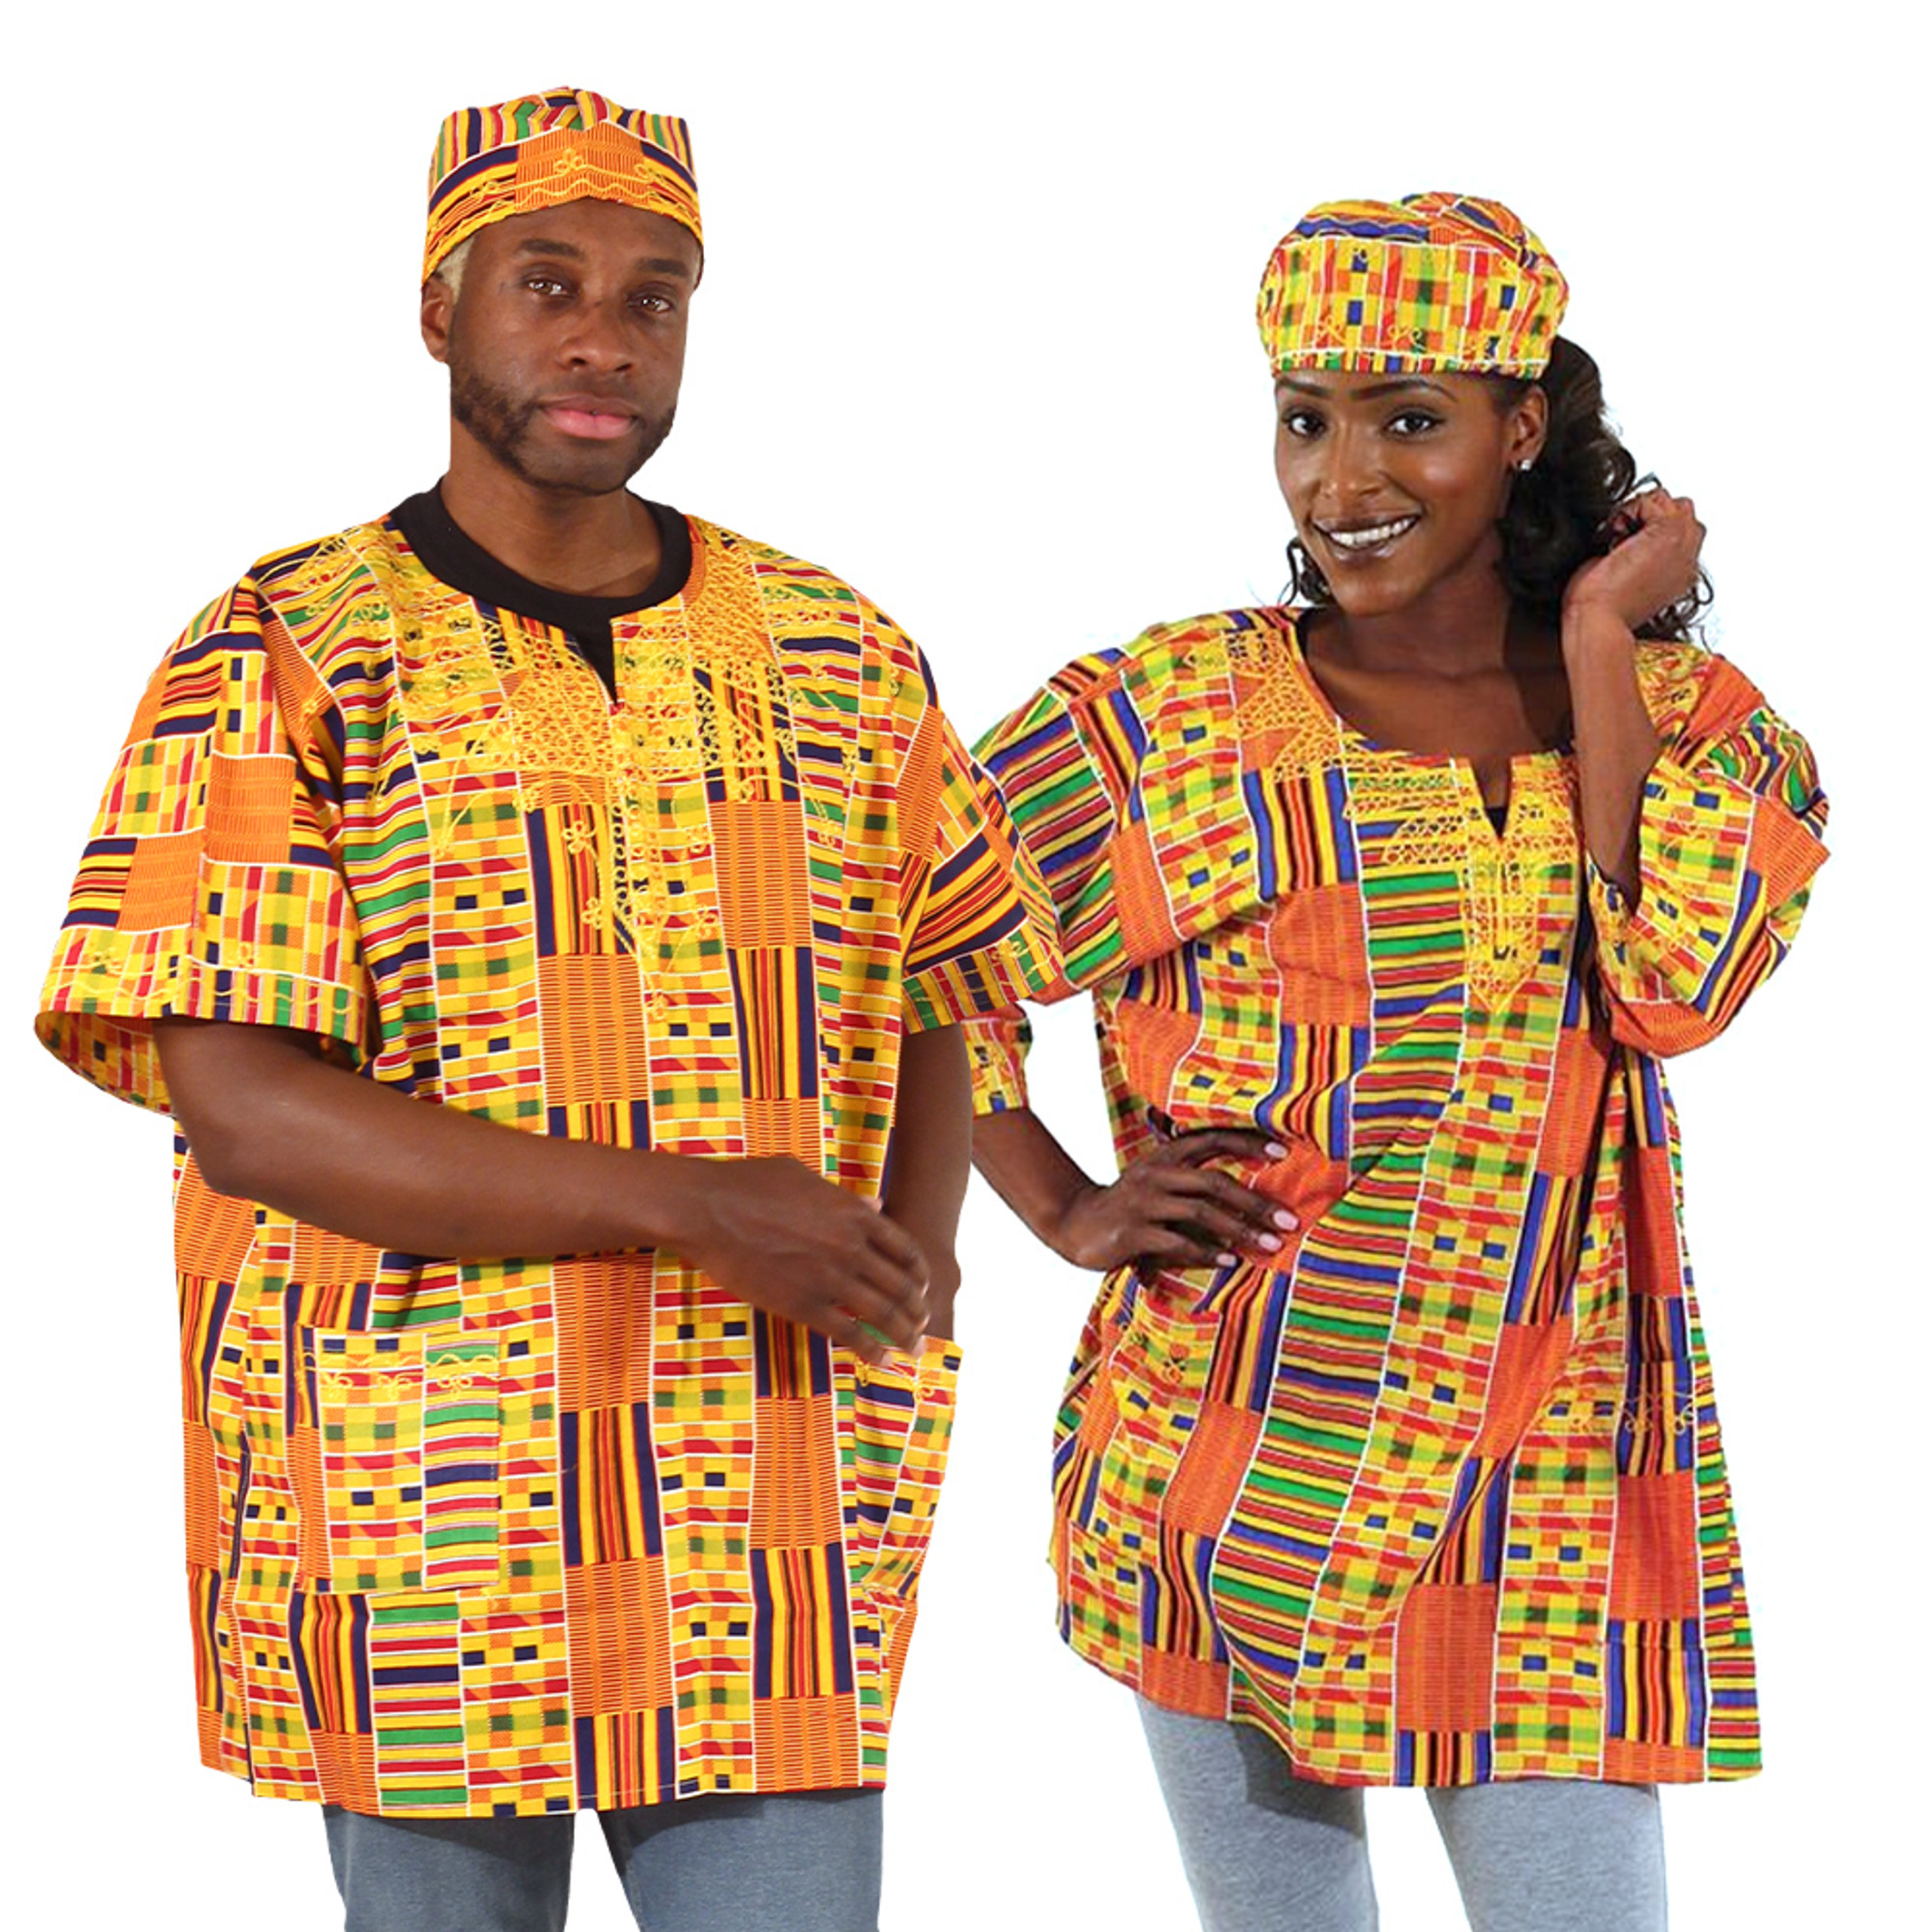 Wholesale African Women's Clothing - Skirts, Dresses & More